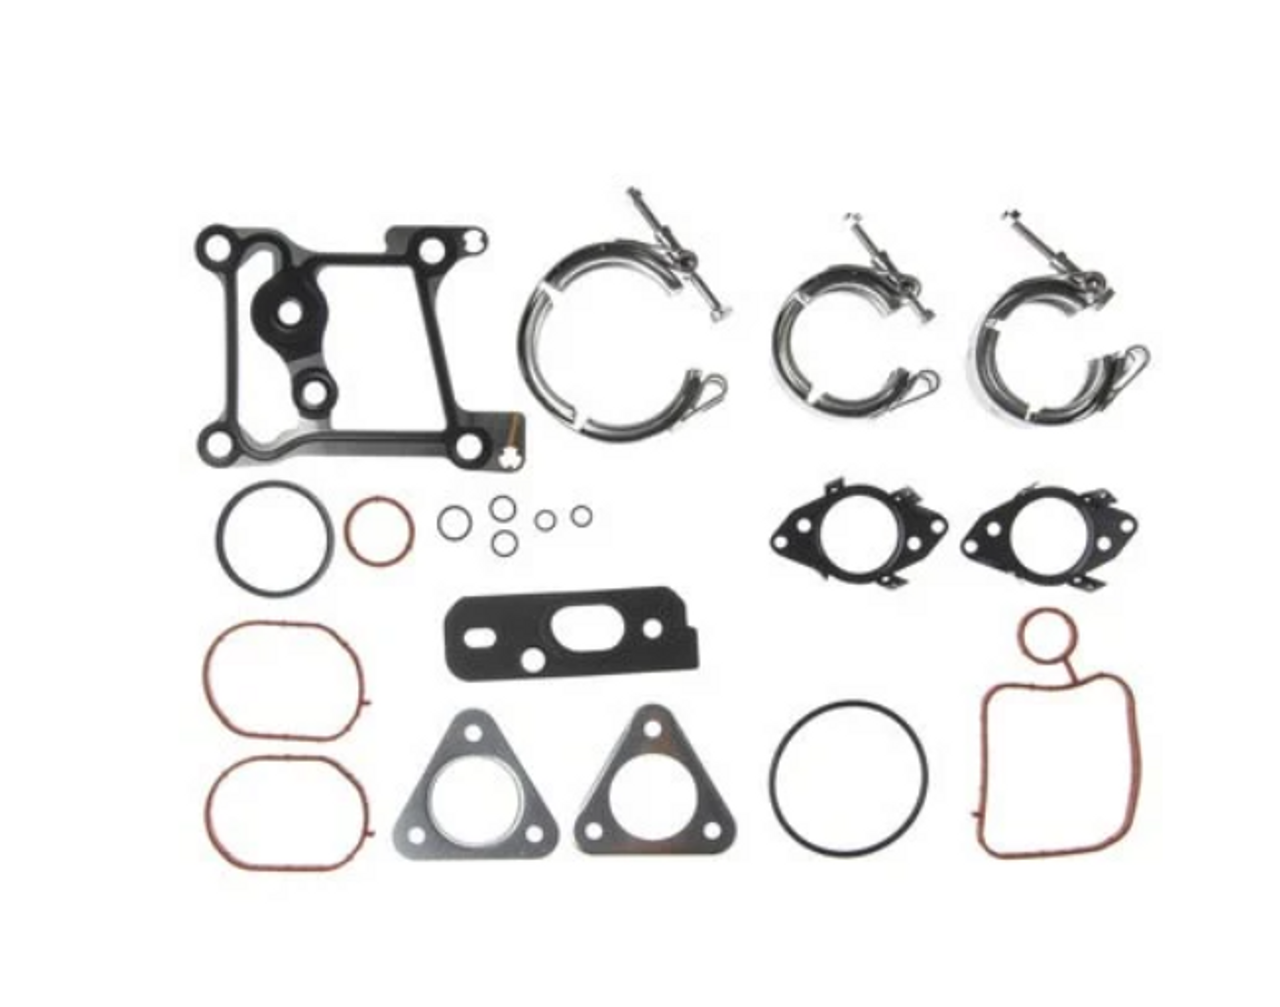 Mahle Turbocharger Mounting Gasket Set 2011 to 2014 6.7L Powerstroke (MCIGS33692)-Main View